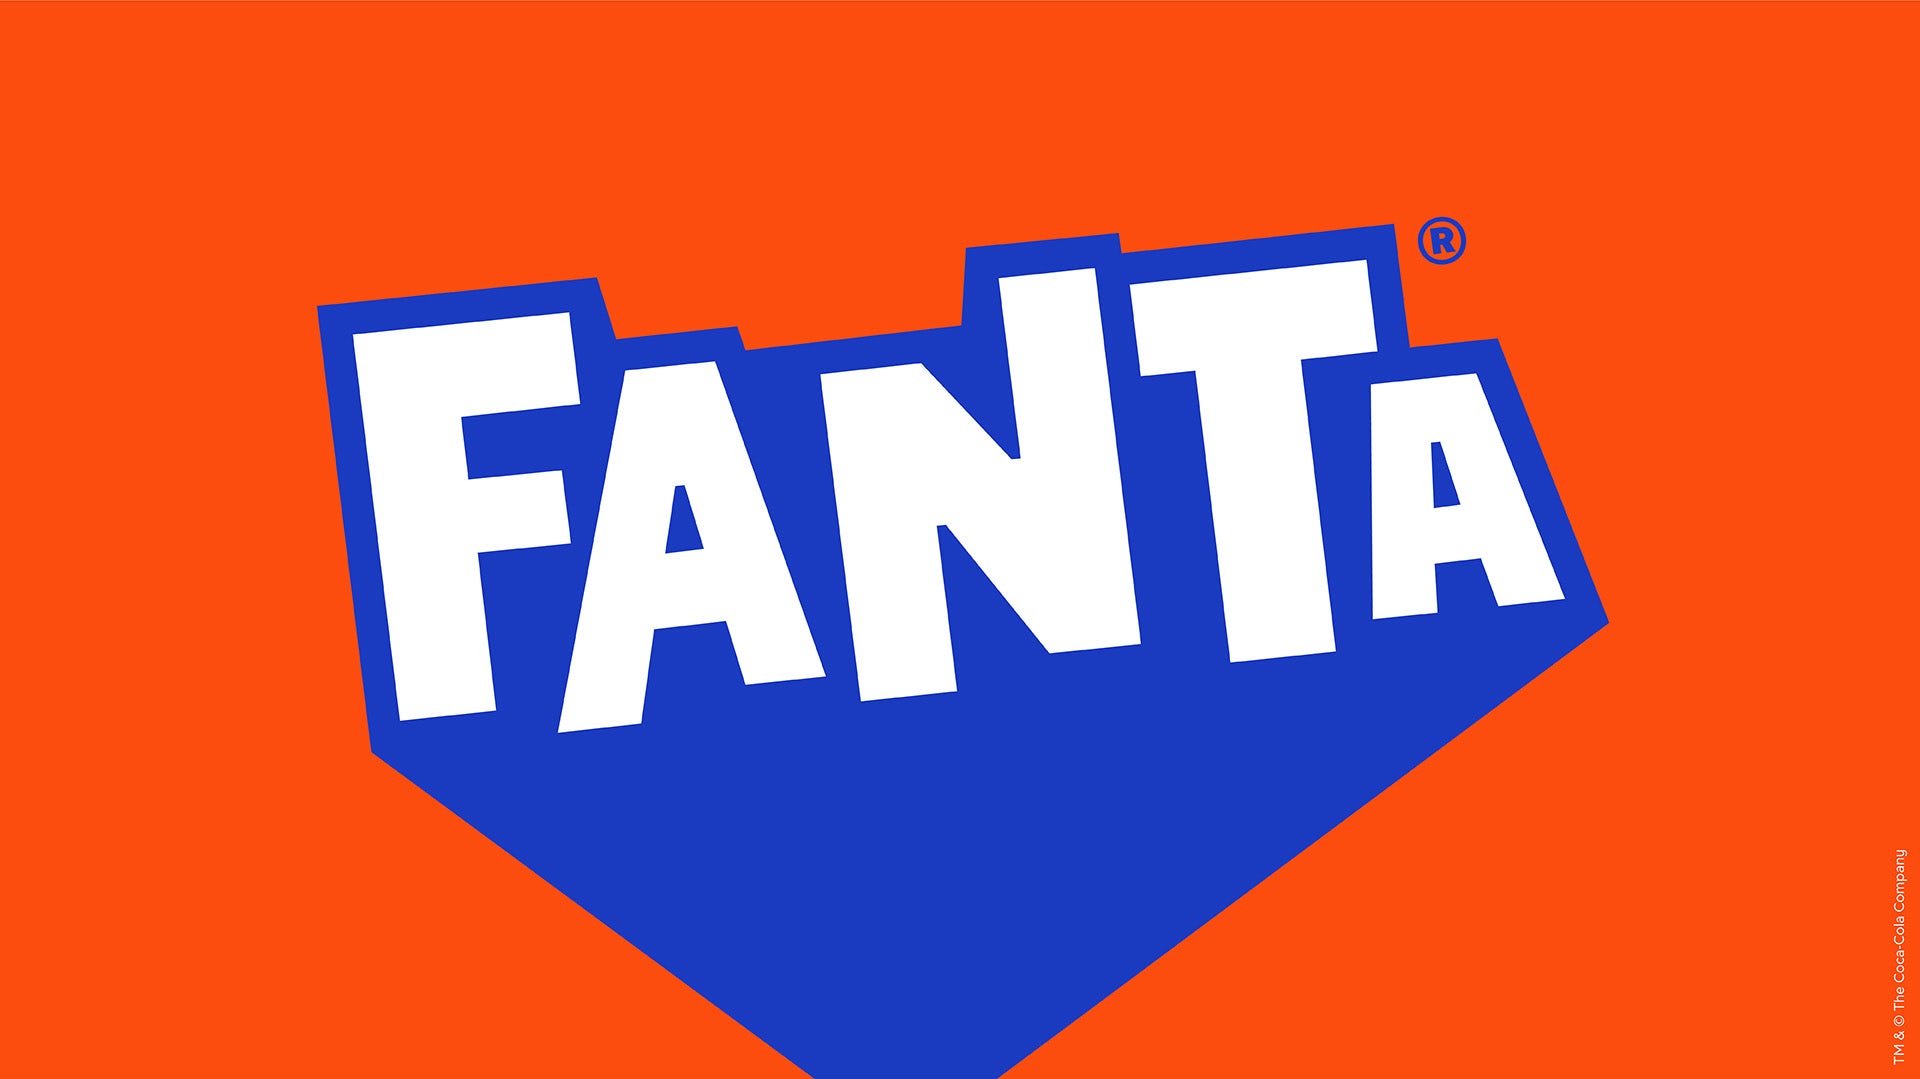 Graphic of the new Fanta wordmark written in white uppercase letters, with an exaggerated blue shadow, shown on a bright orange background